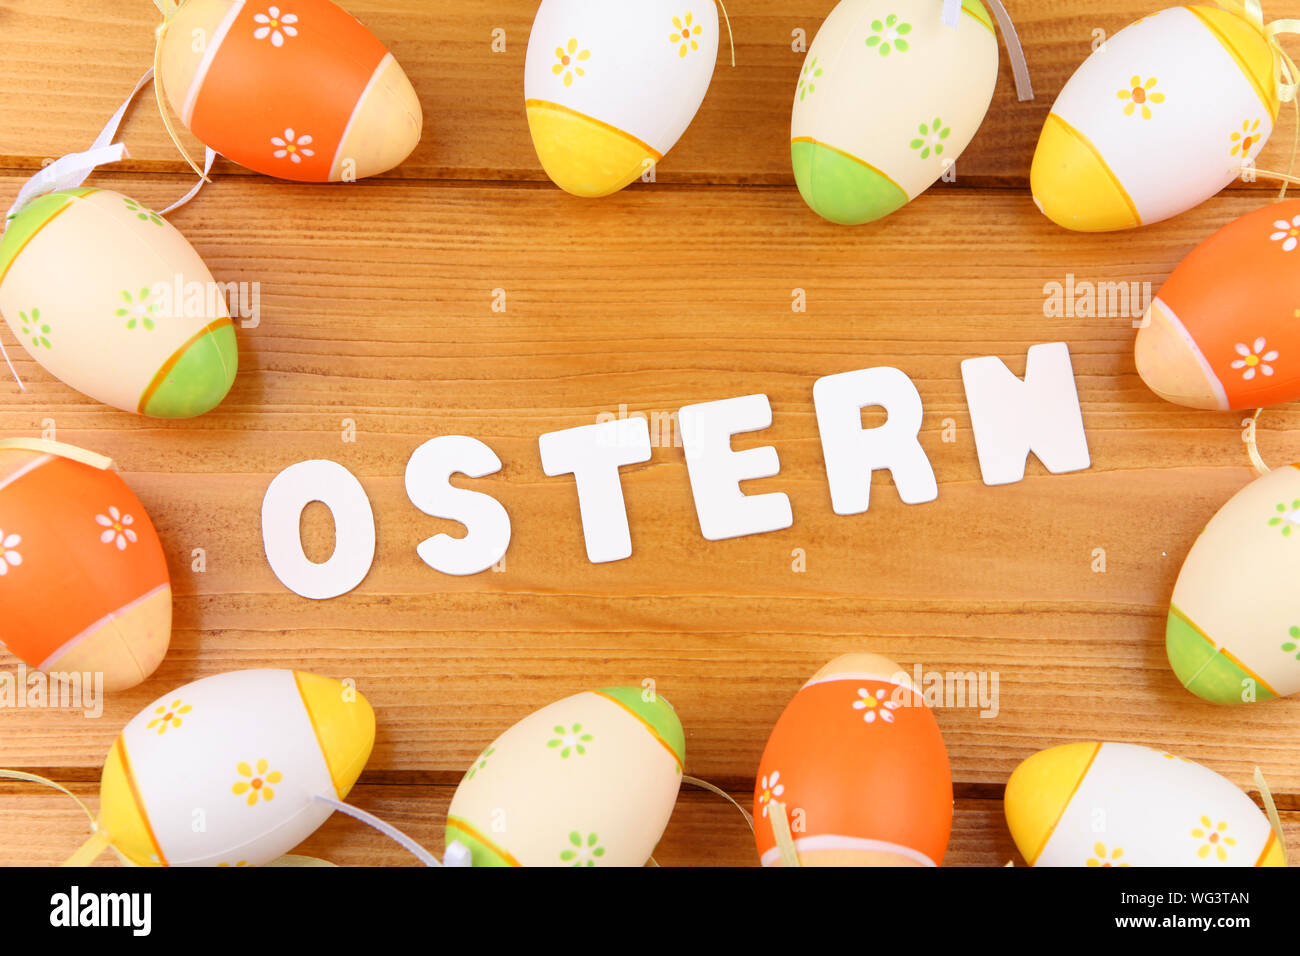 Directly Above Shot Of Ostern Text Amidst Easter Eggs On Table Stock Photo